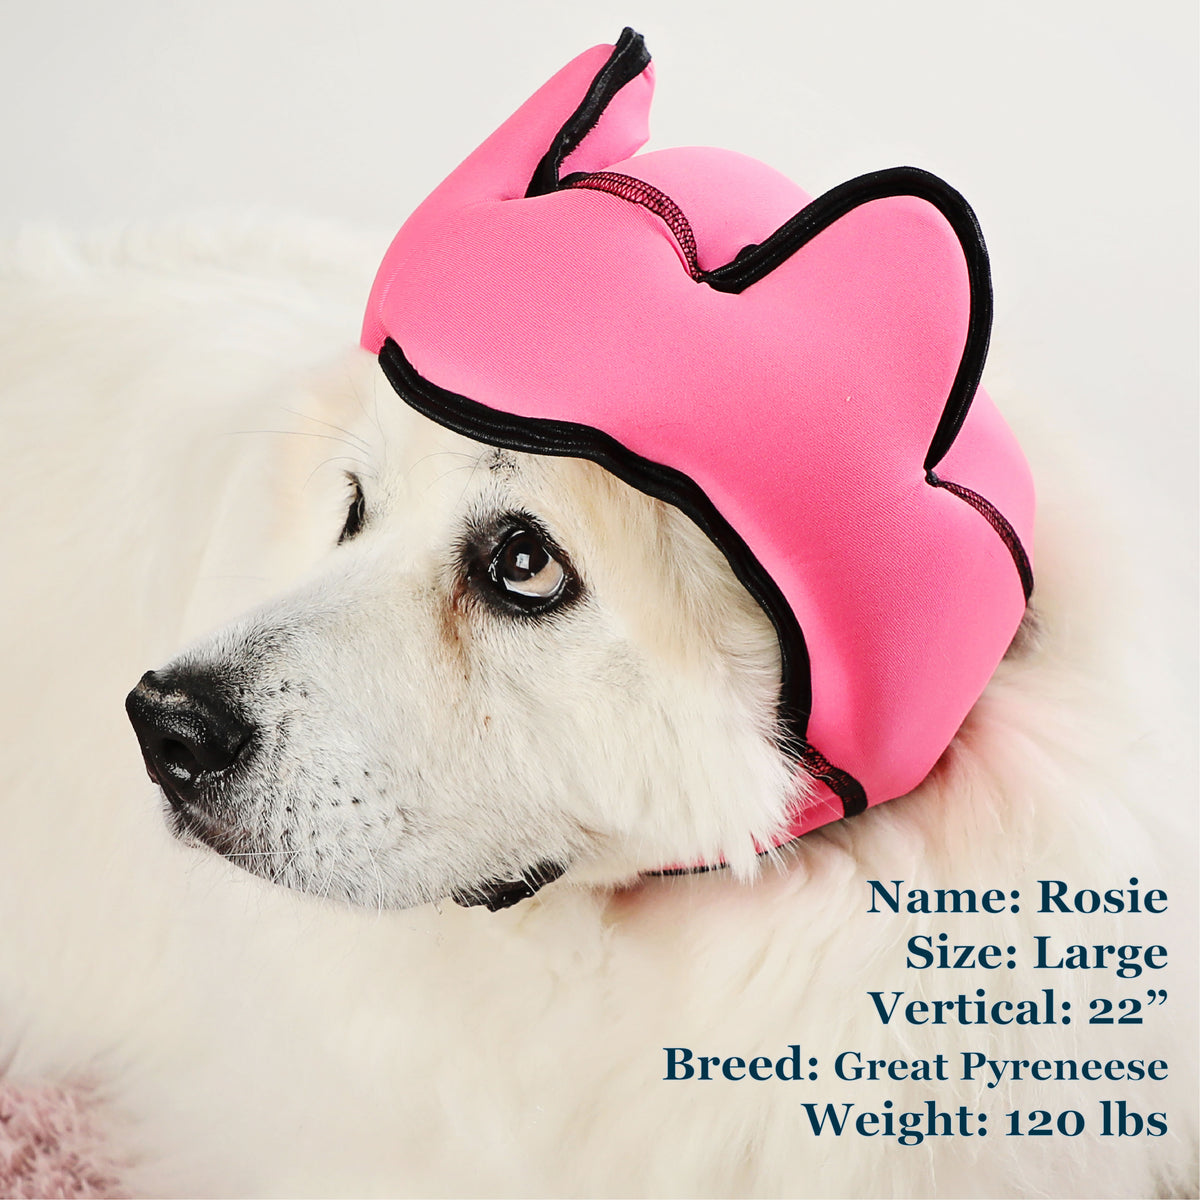 Rosie is a Pyreneese in a Large Pink PAWNIX Noise Cancelling Headset for dogs